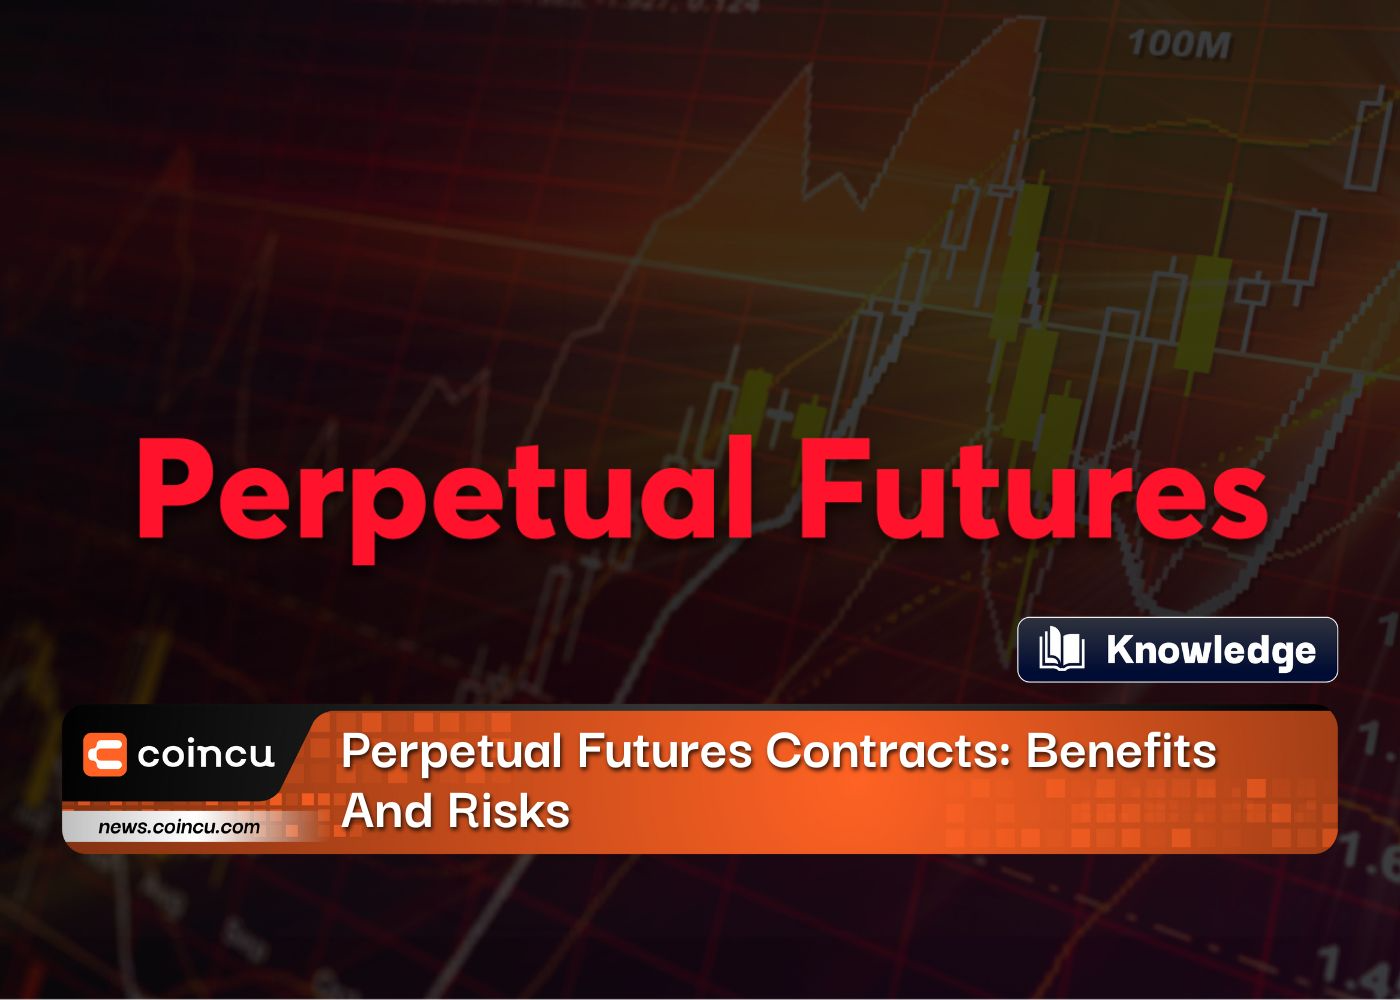 Perpetual Futures Contracts: Benefits And Risks